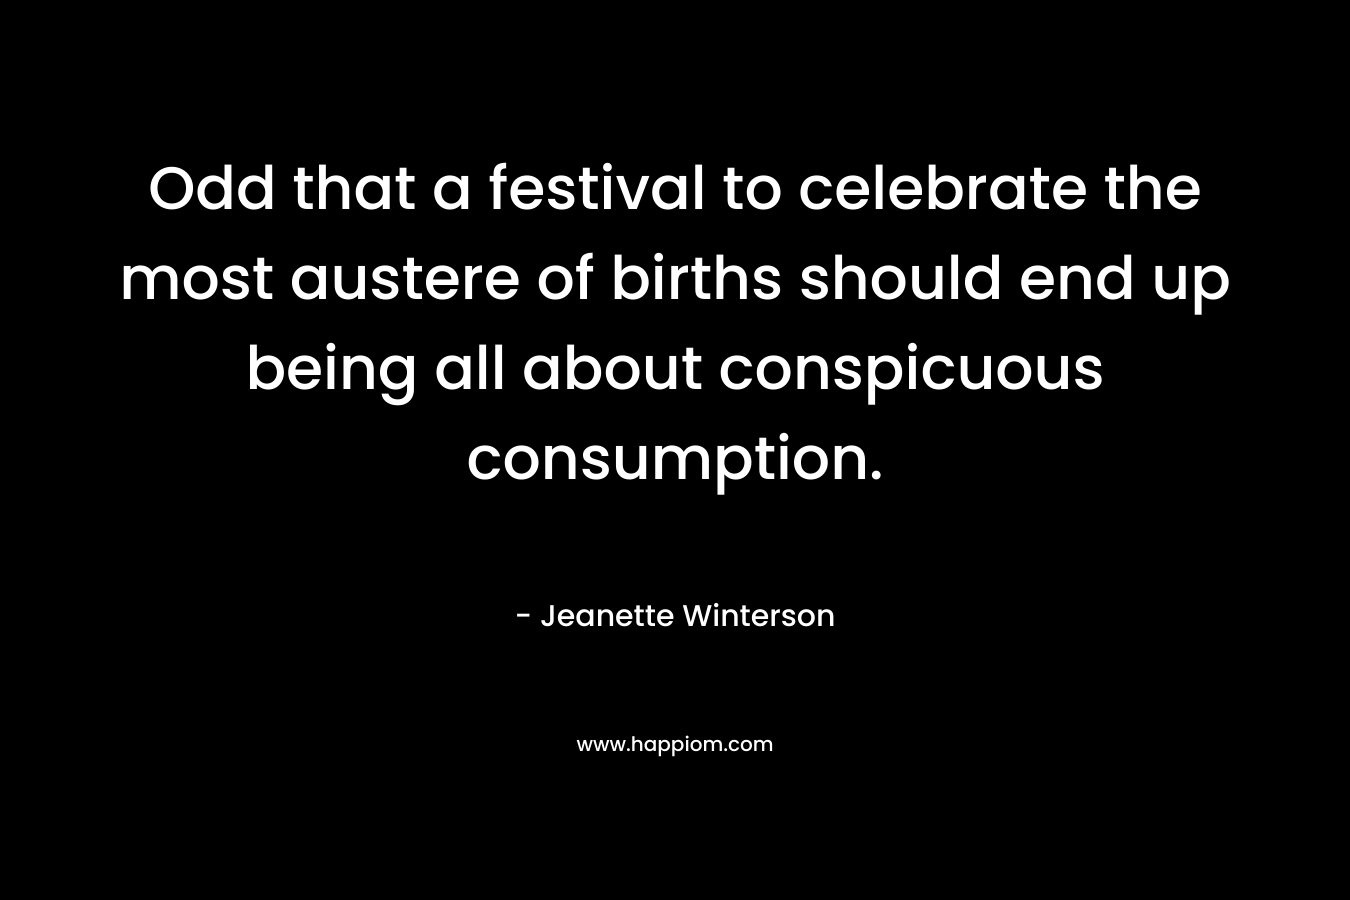 Odd that a festival to celebrate the most austere of births should end up being all about conspicuous consumption.